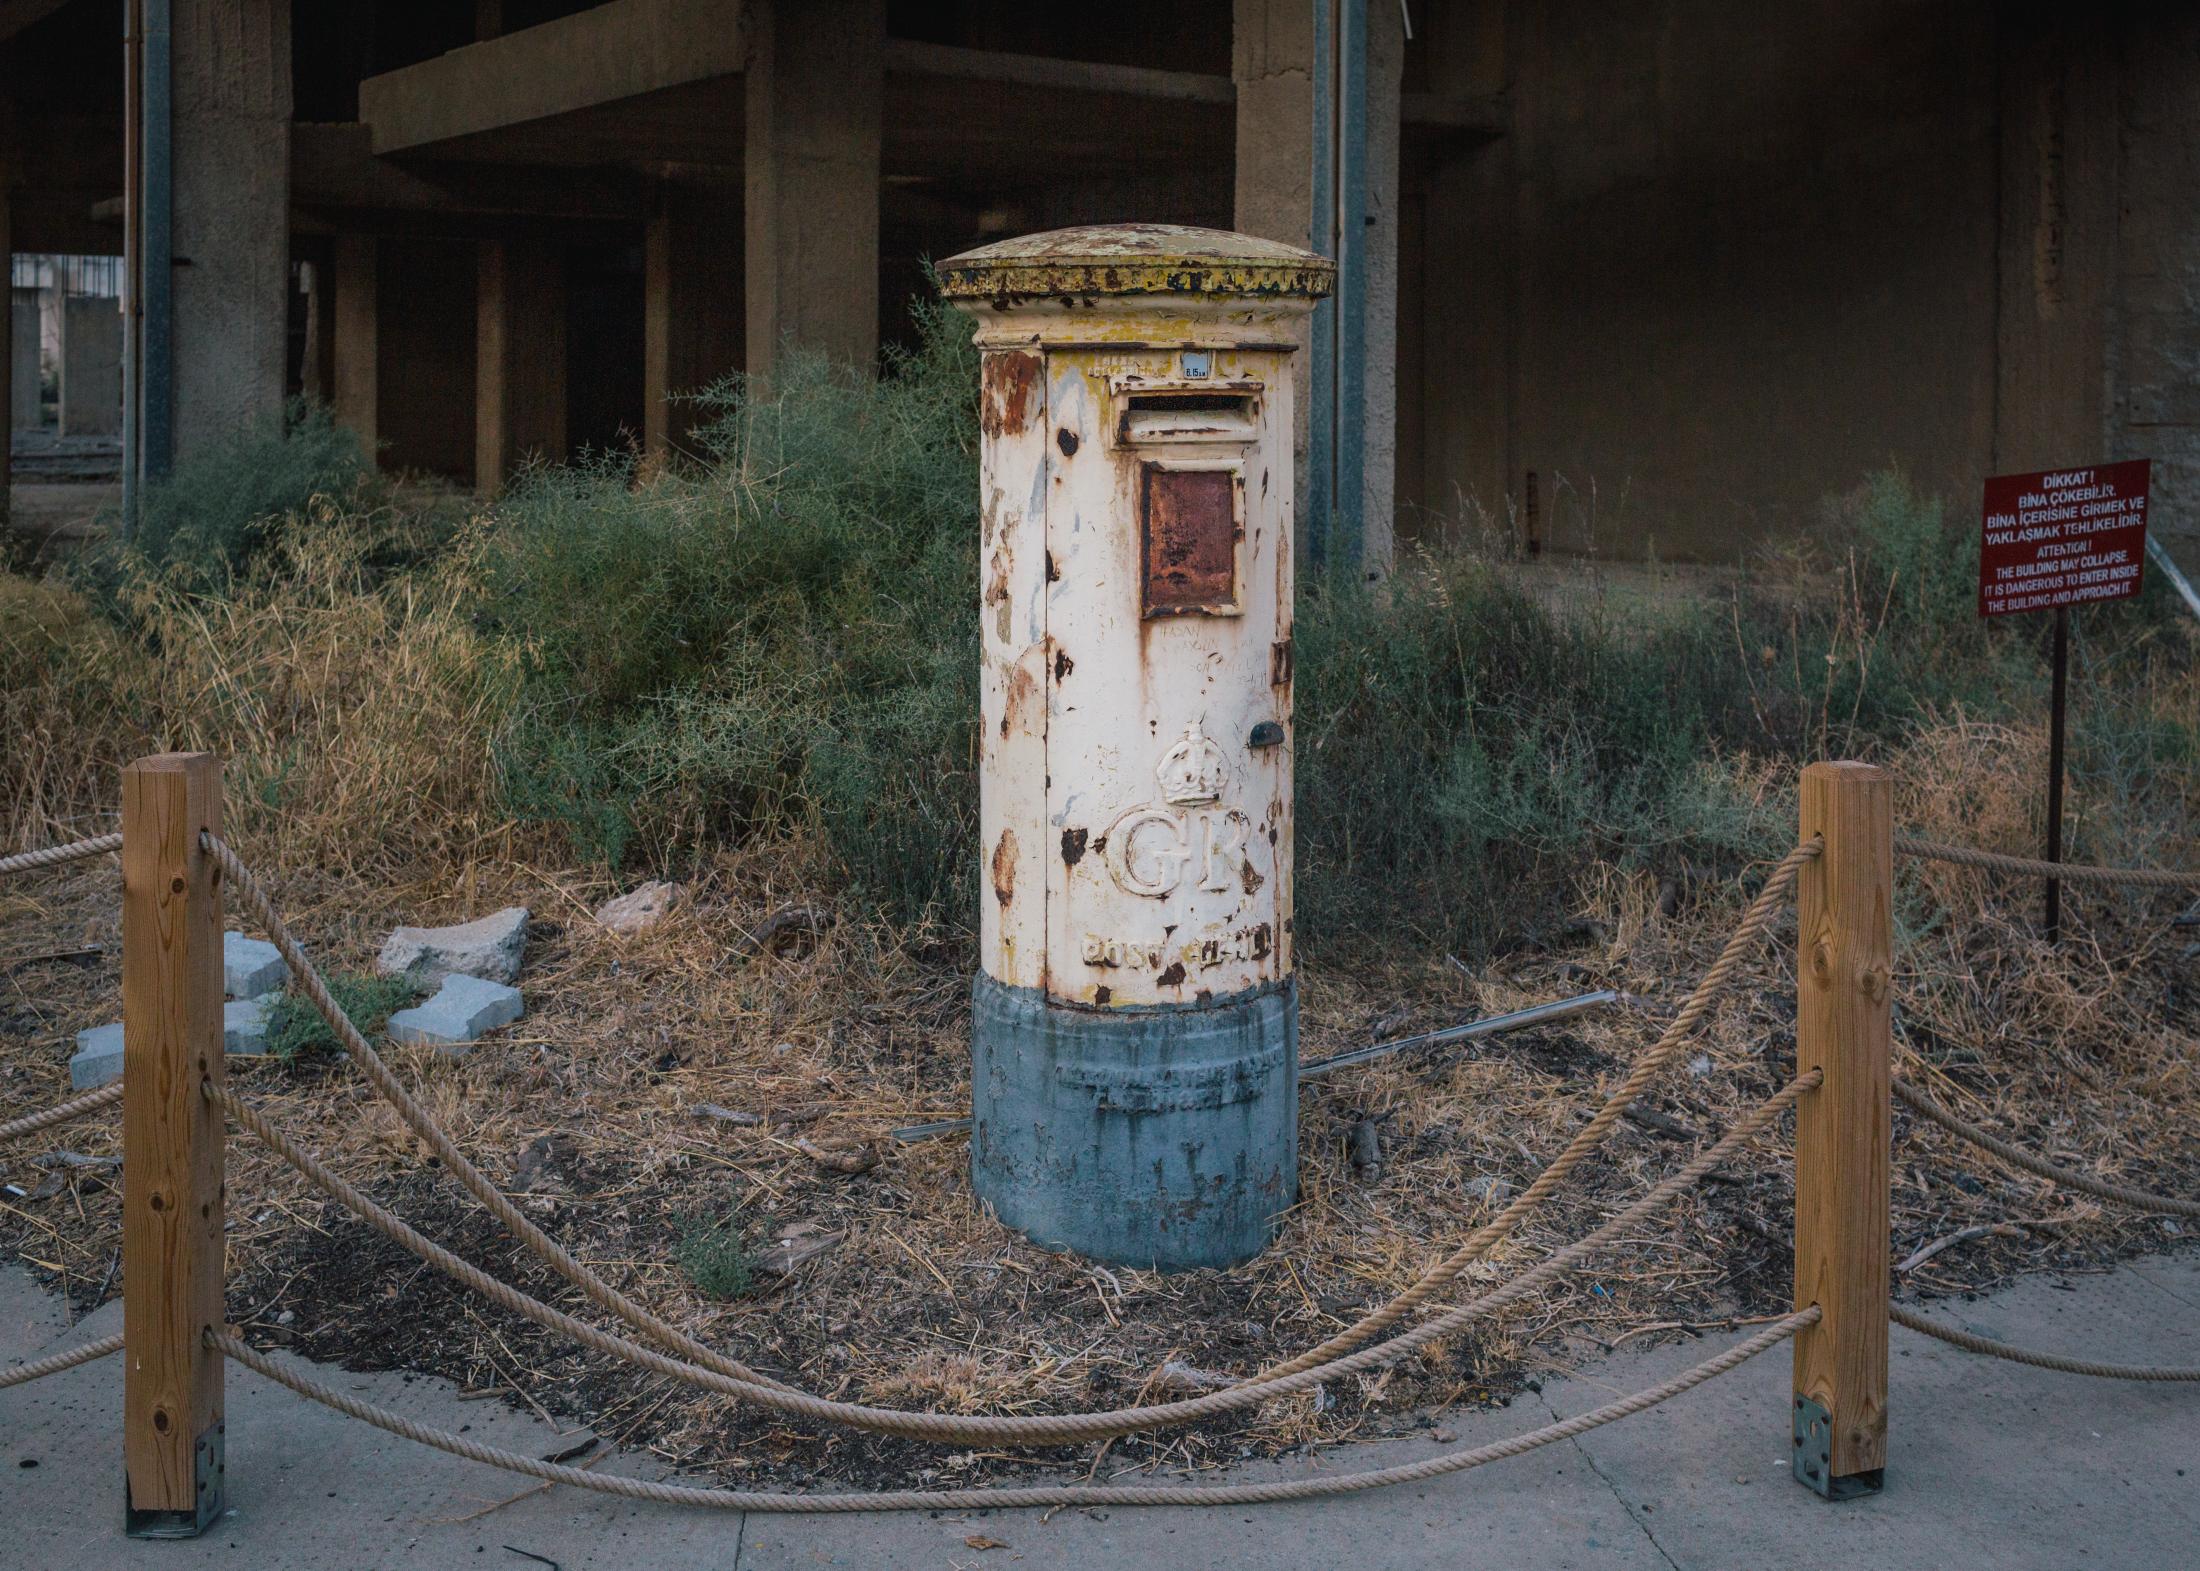 A former mail box in the ghost town of Famagusta.